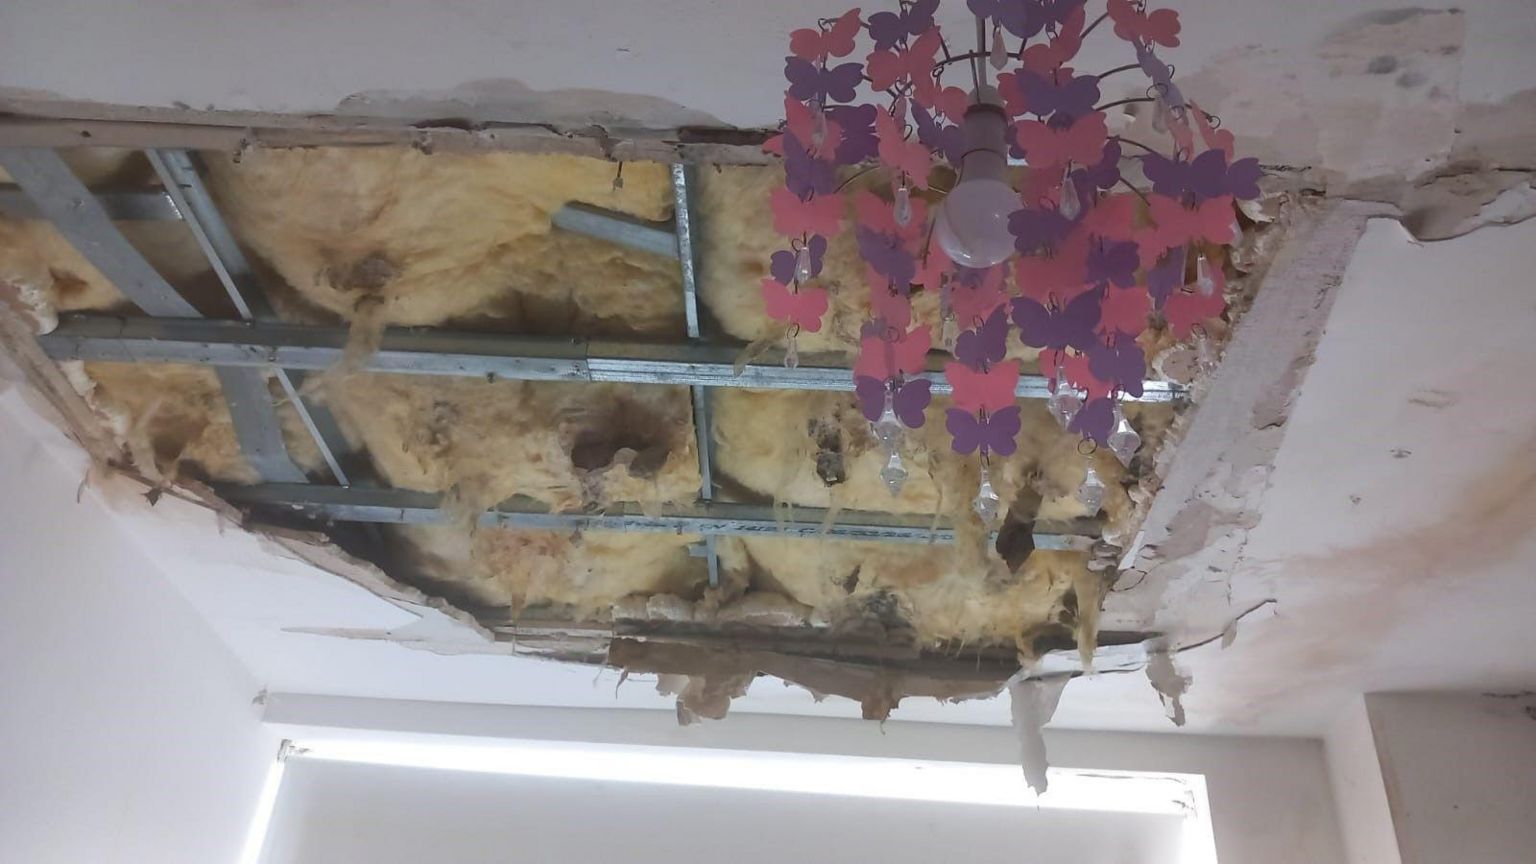 A collapsed ceiling